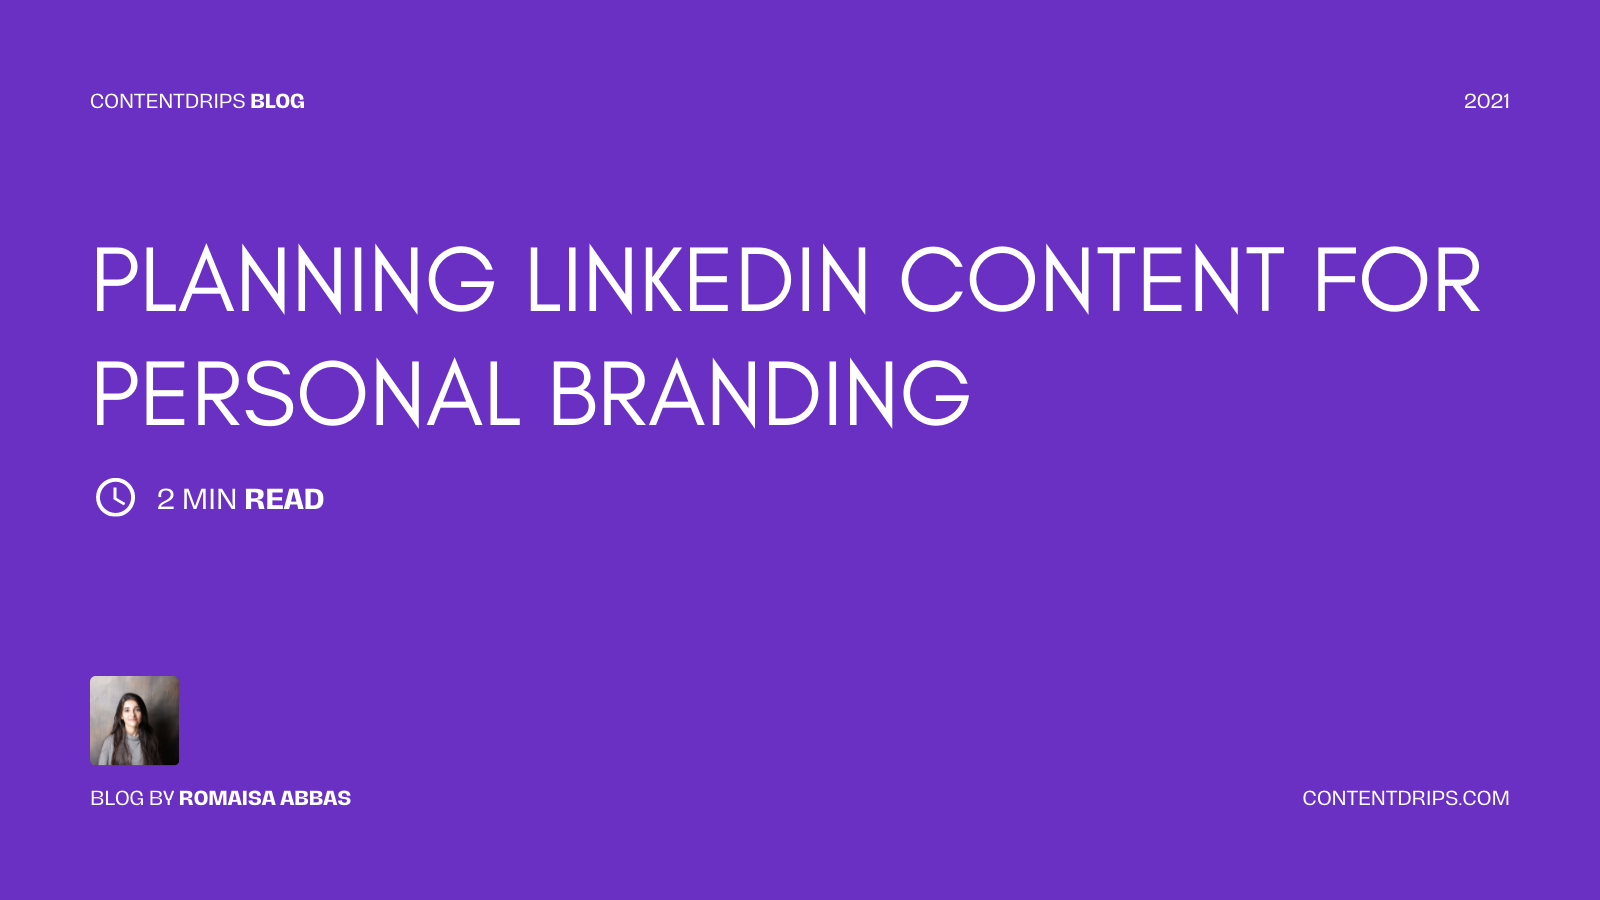 Linkedin Content for Personal Branding